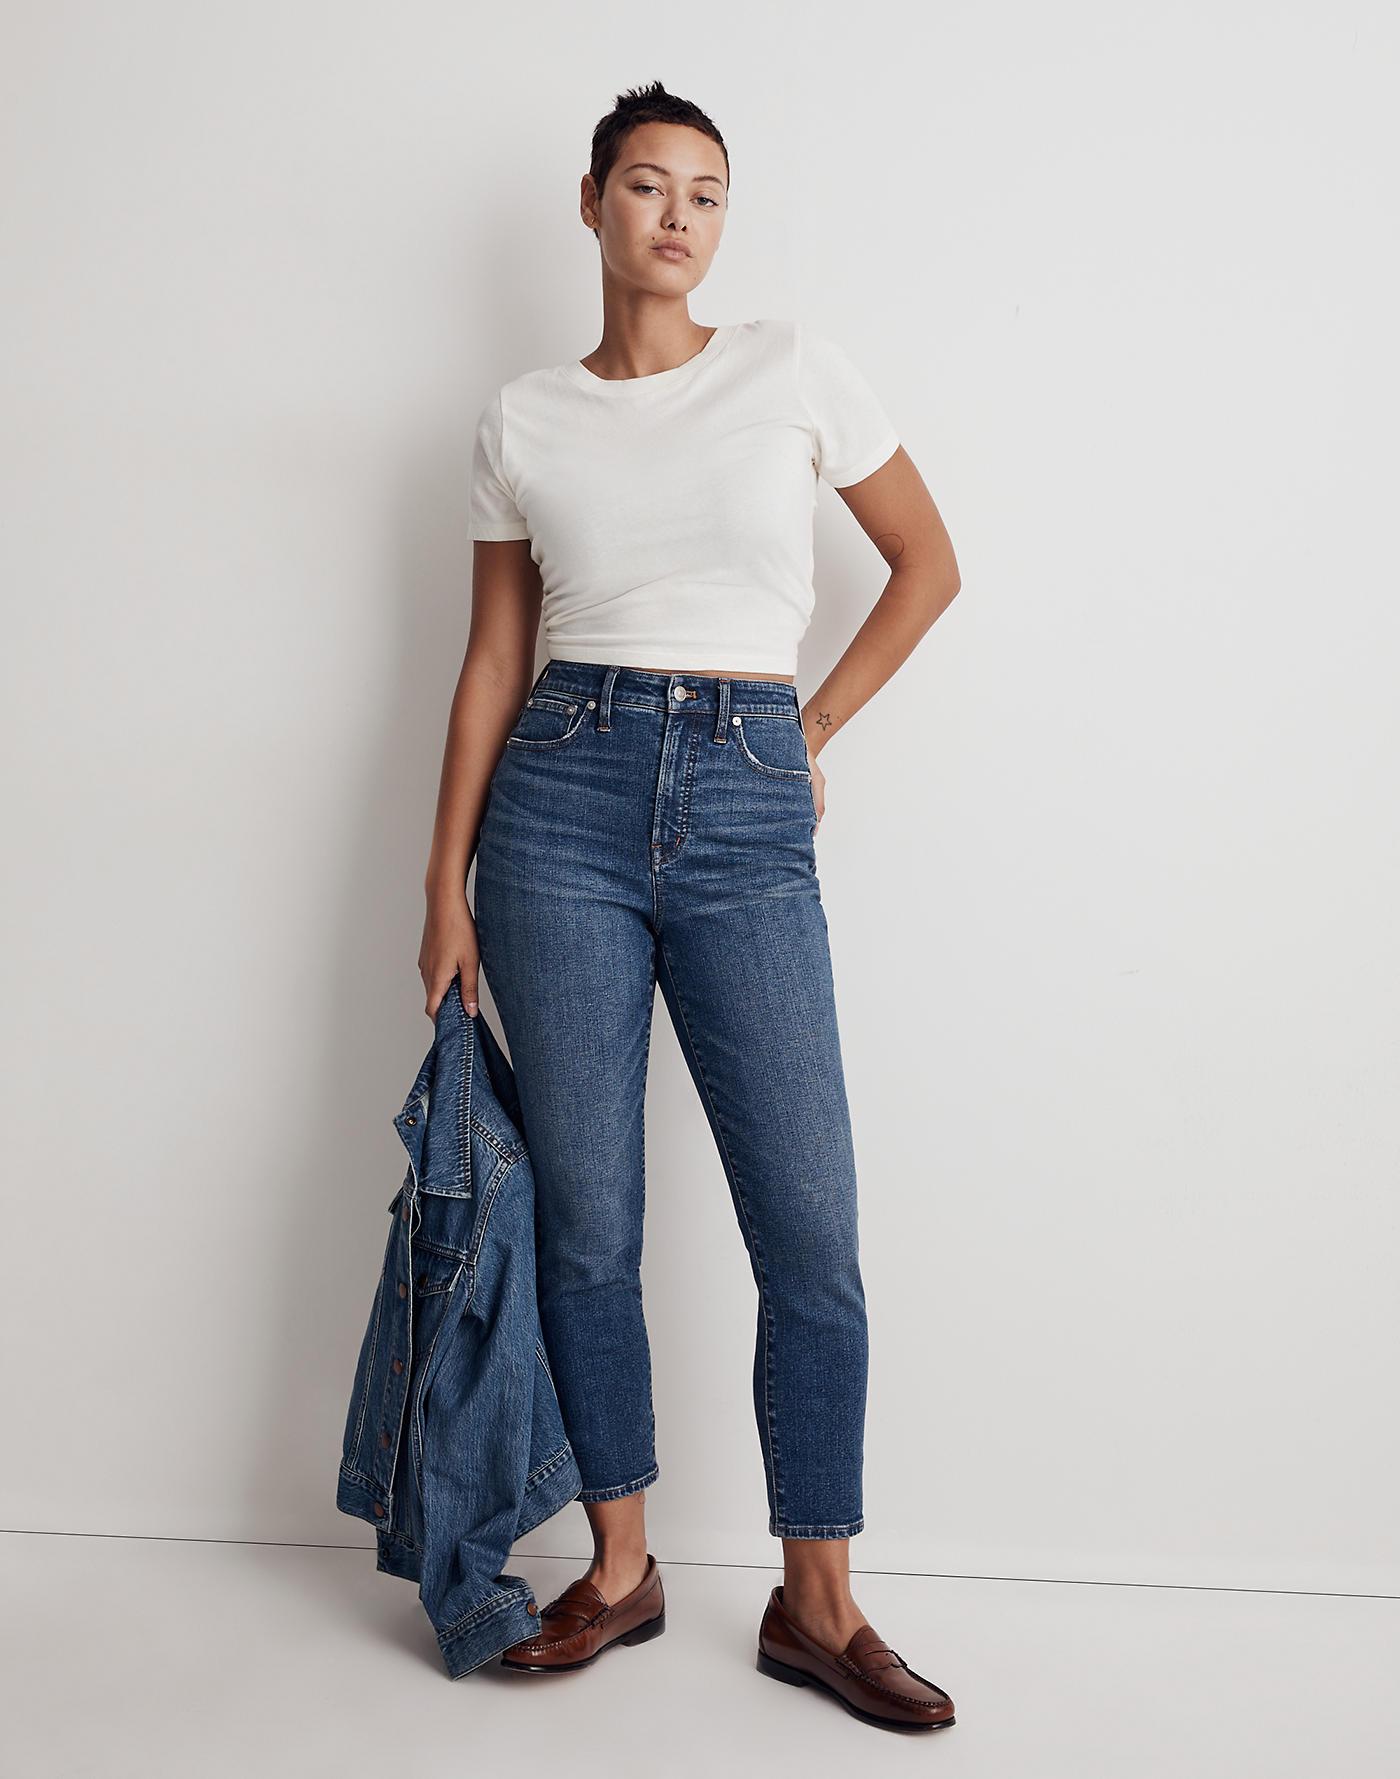 MW The Curvy Perfect Vintage Jean In Manorford Wash: Instacozy Edition ...